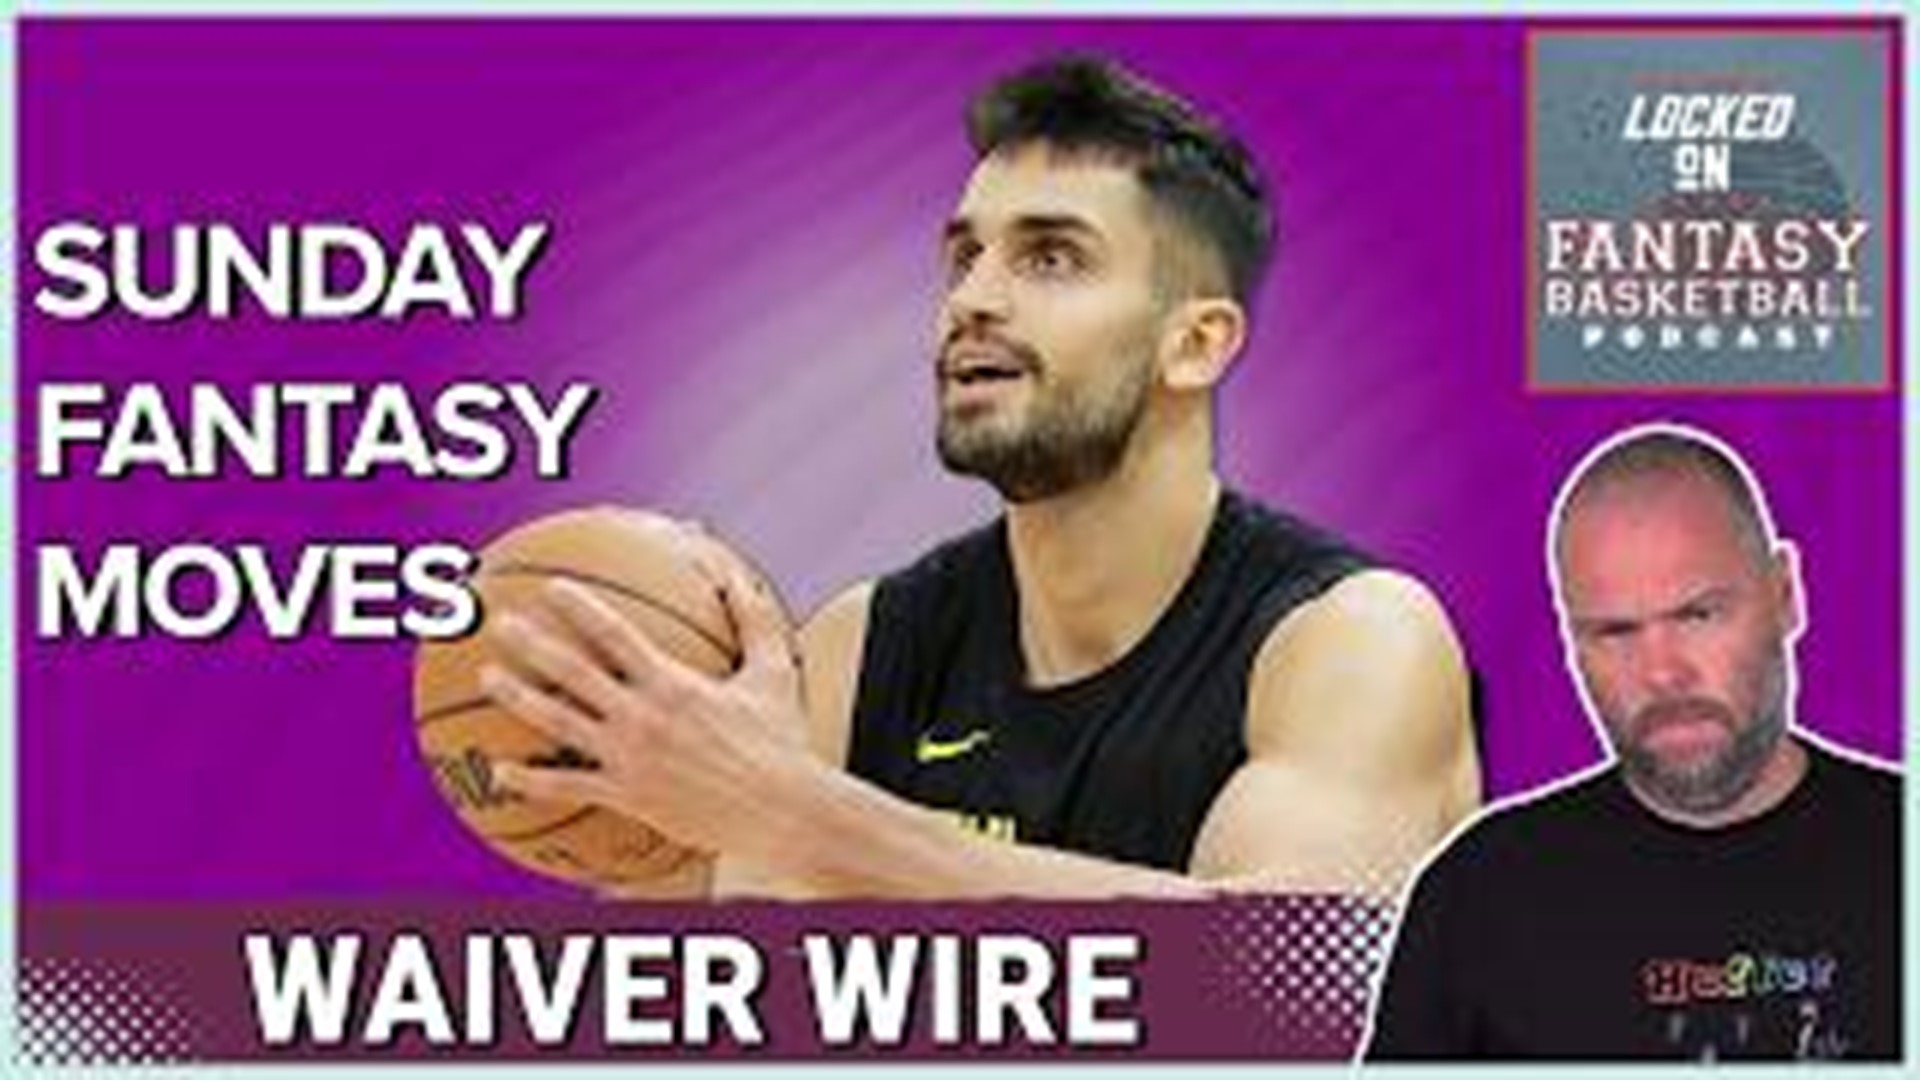 Ready for Sunday's NBA action? Josh Lloyd has the ultimate daily NBA Fantasy Basketball lookahead, spotlighting not just the games but the players!